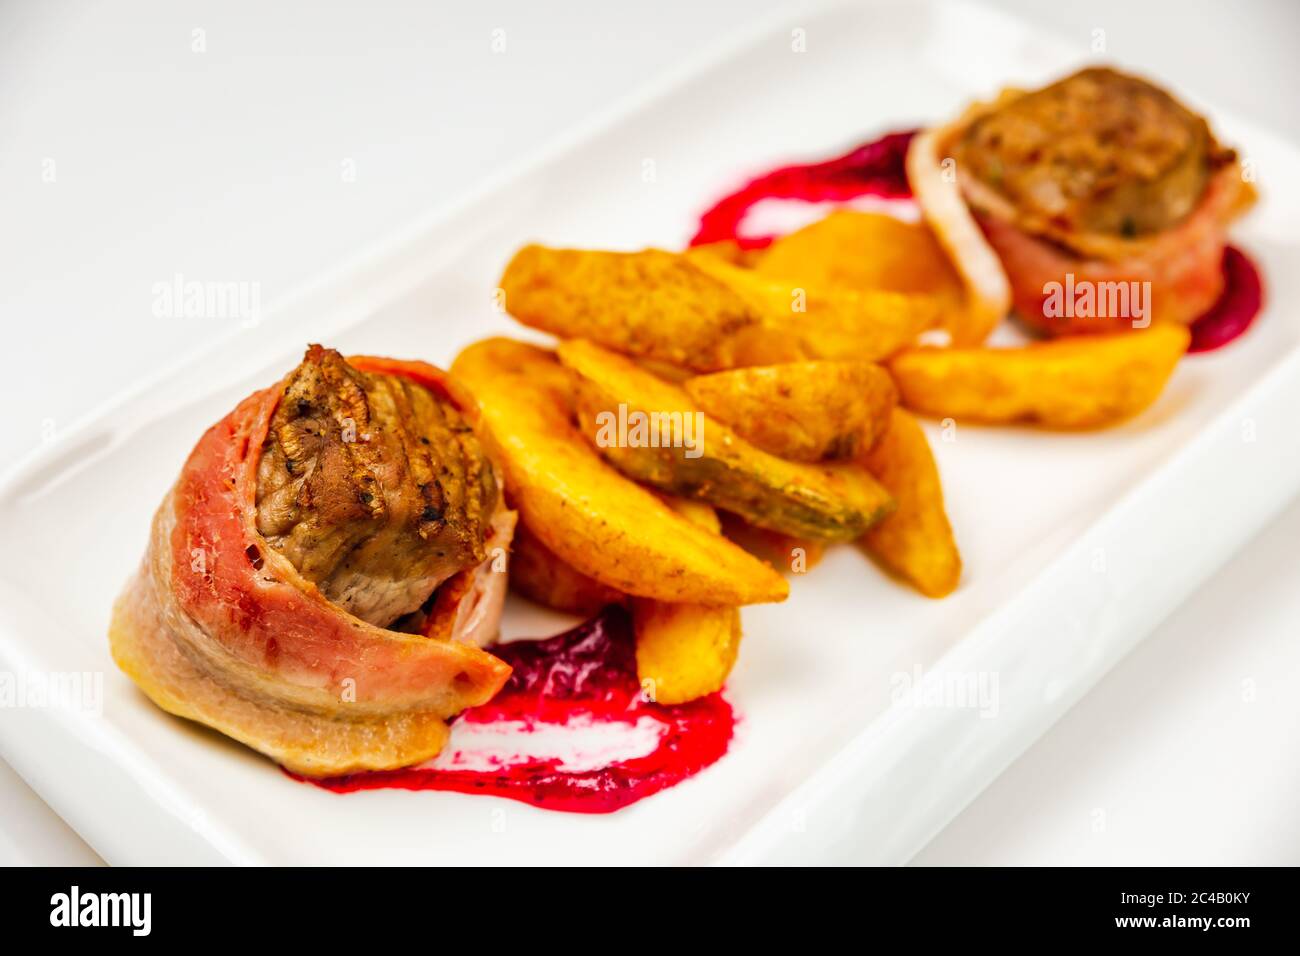 Fillet mignon rolled in bacon and baked in oven with berry sauce. Potato for garnish. Stock Photo